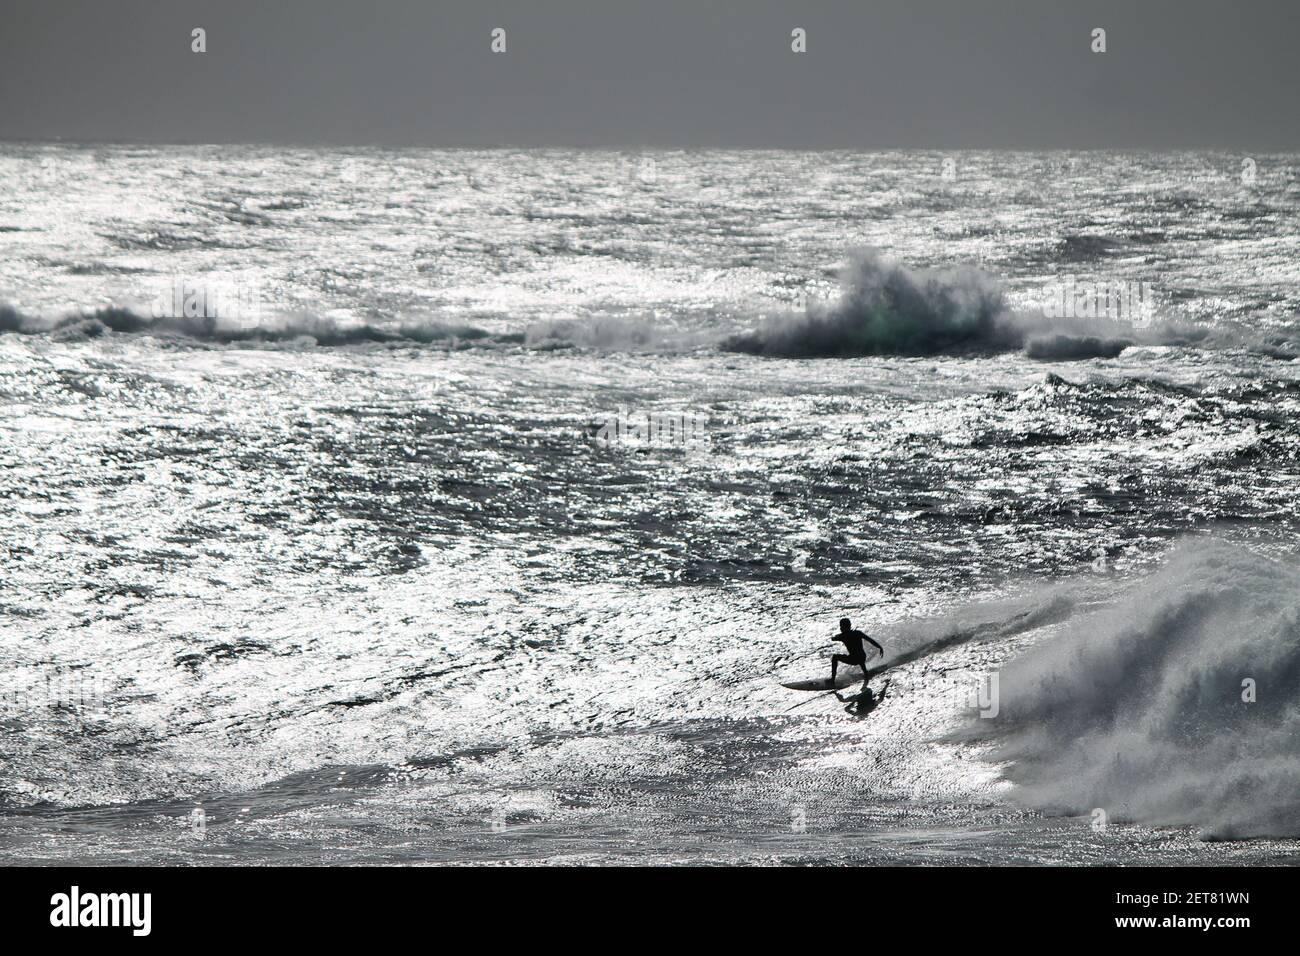 Surfer surfing a giant and sparkling wave in Coogee Australia Stock Photo